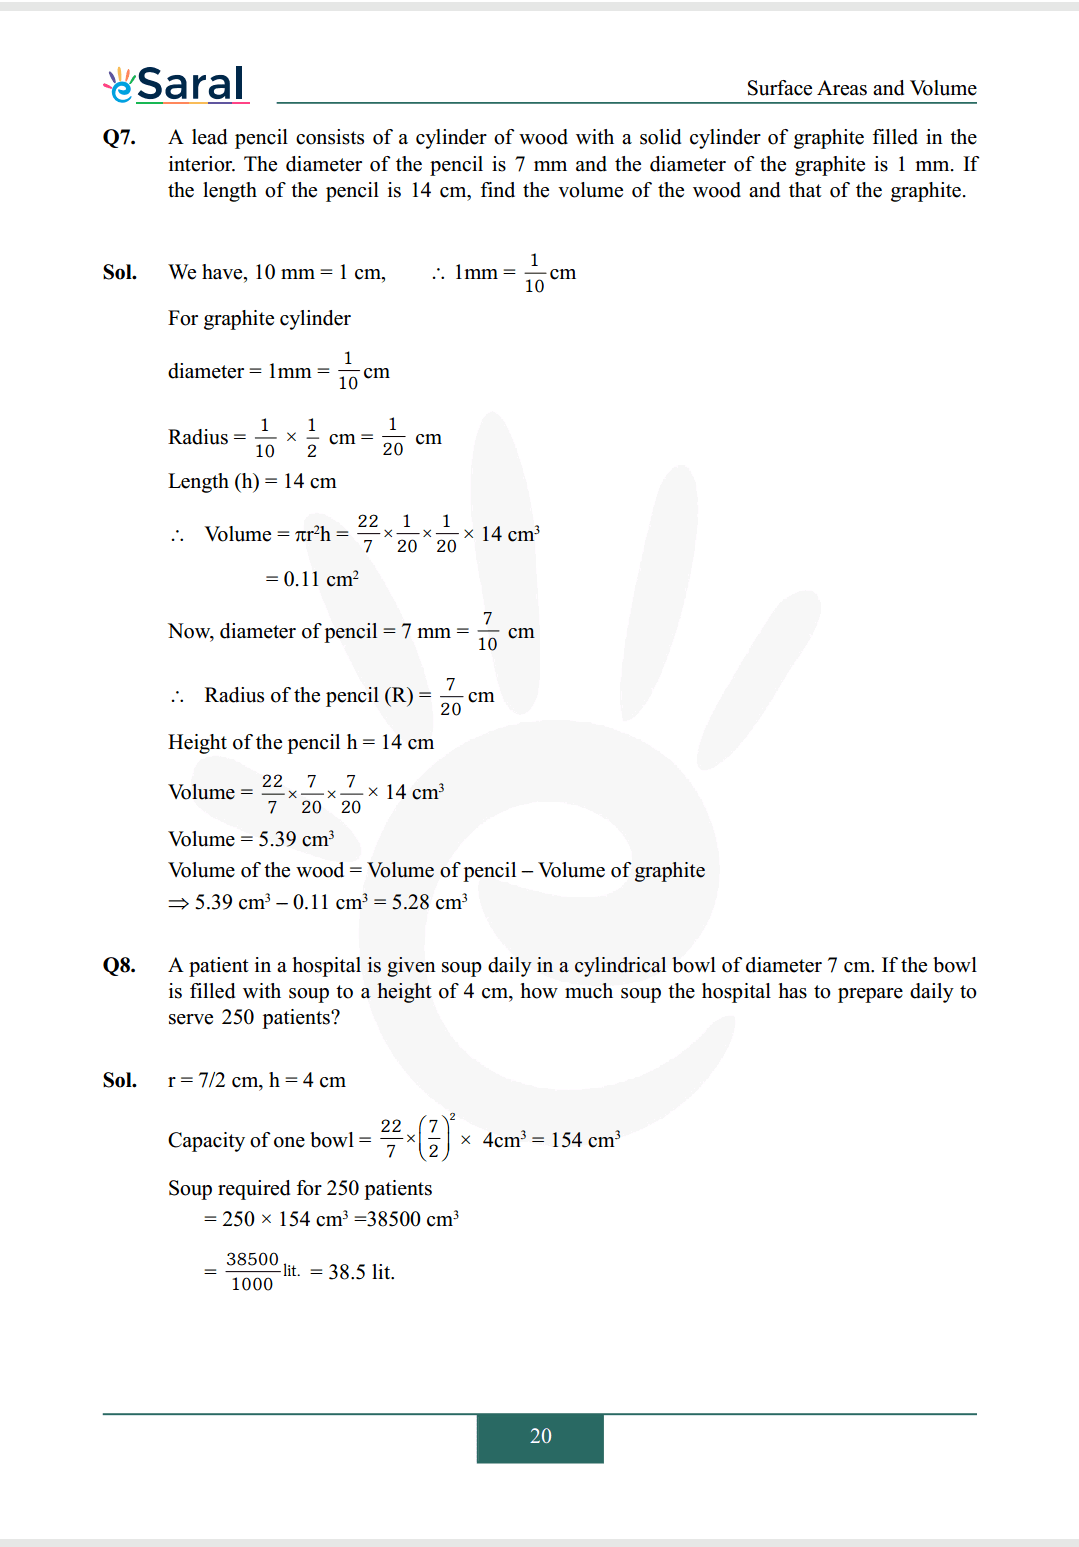 Class 9 maths chapter 13 exercise 13.6 solutions Image 3